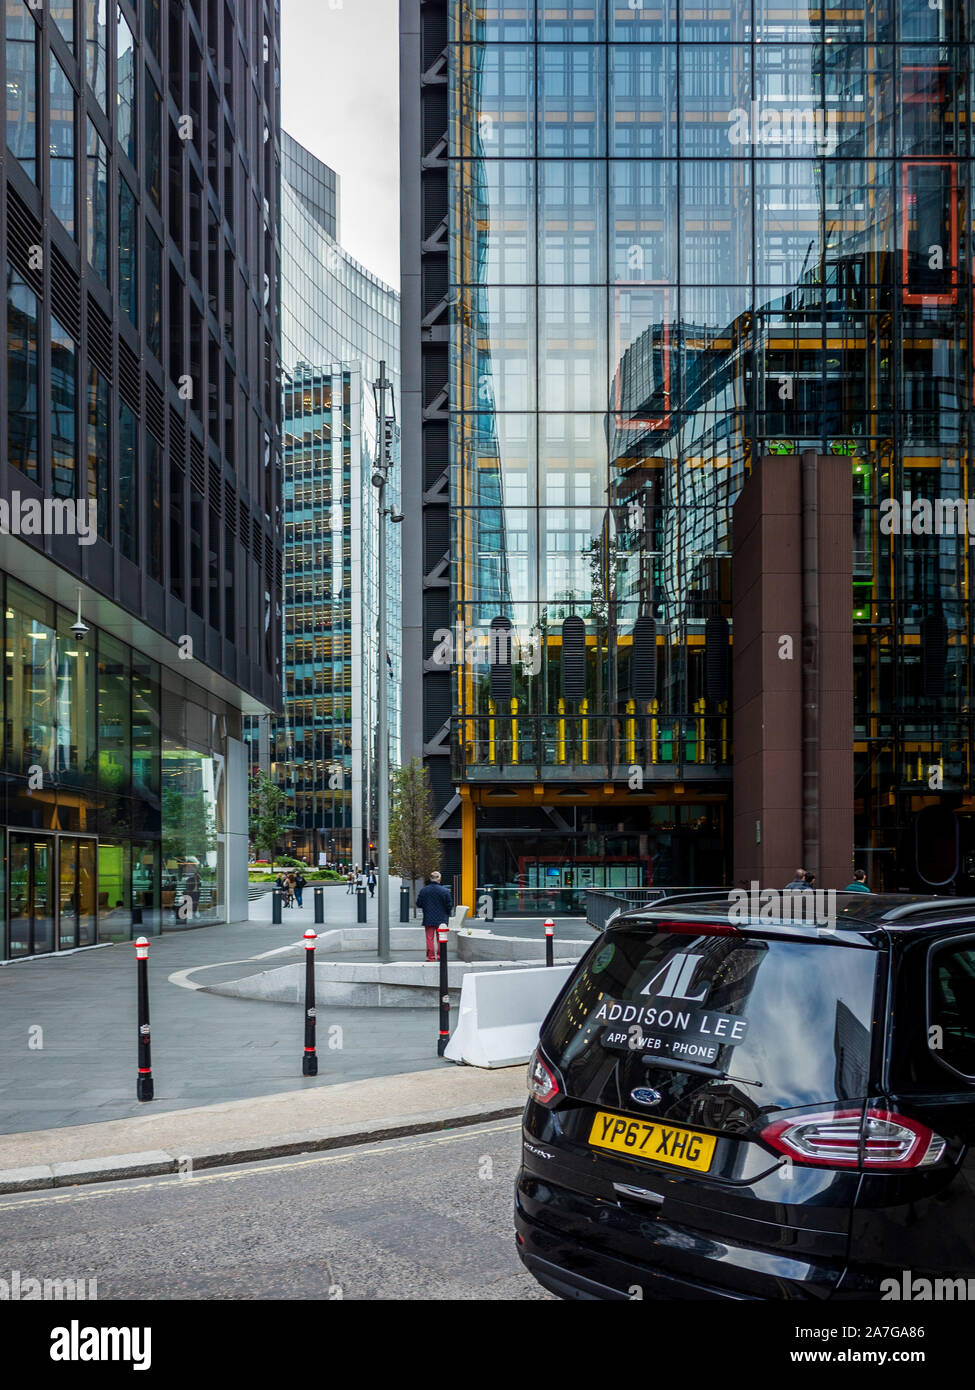 Addison Lee Taxi waiting for passengers in the City of London. The company runs a fleet of 4000 vehicles, mainly in London. Addison Lee Courier. Stock Photo